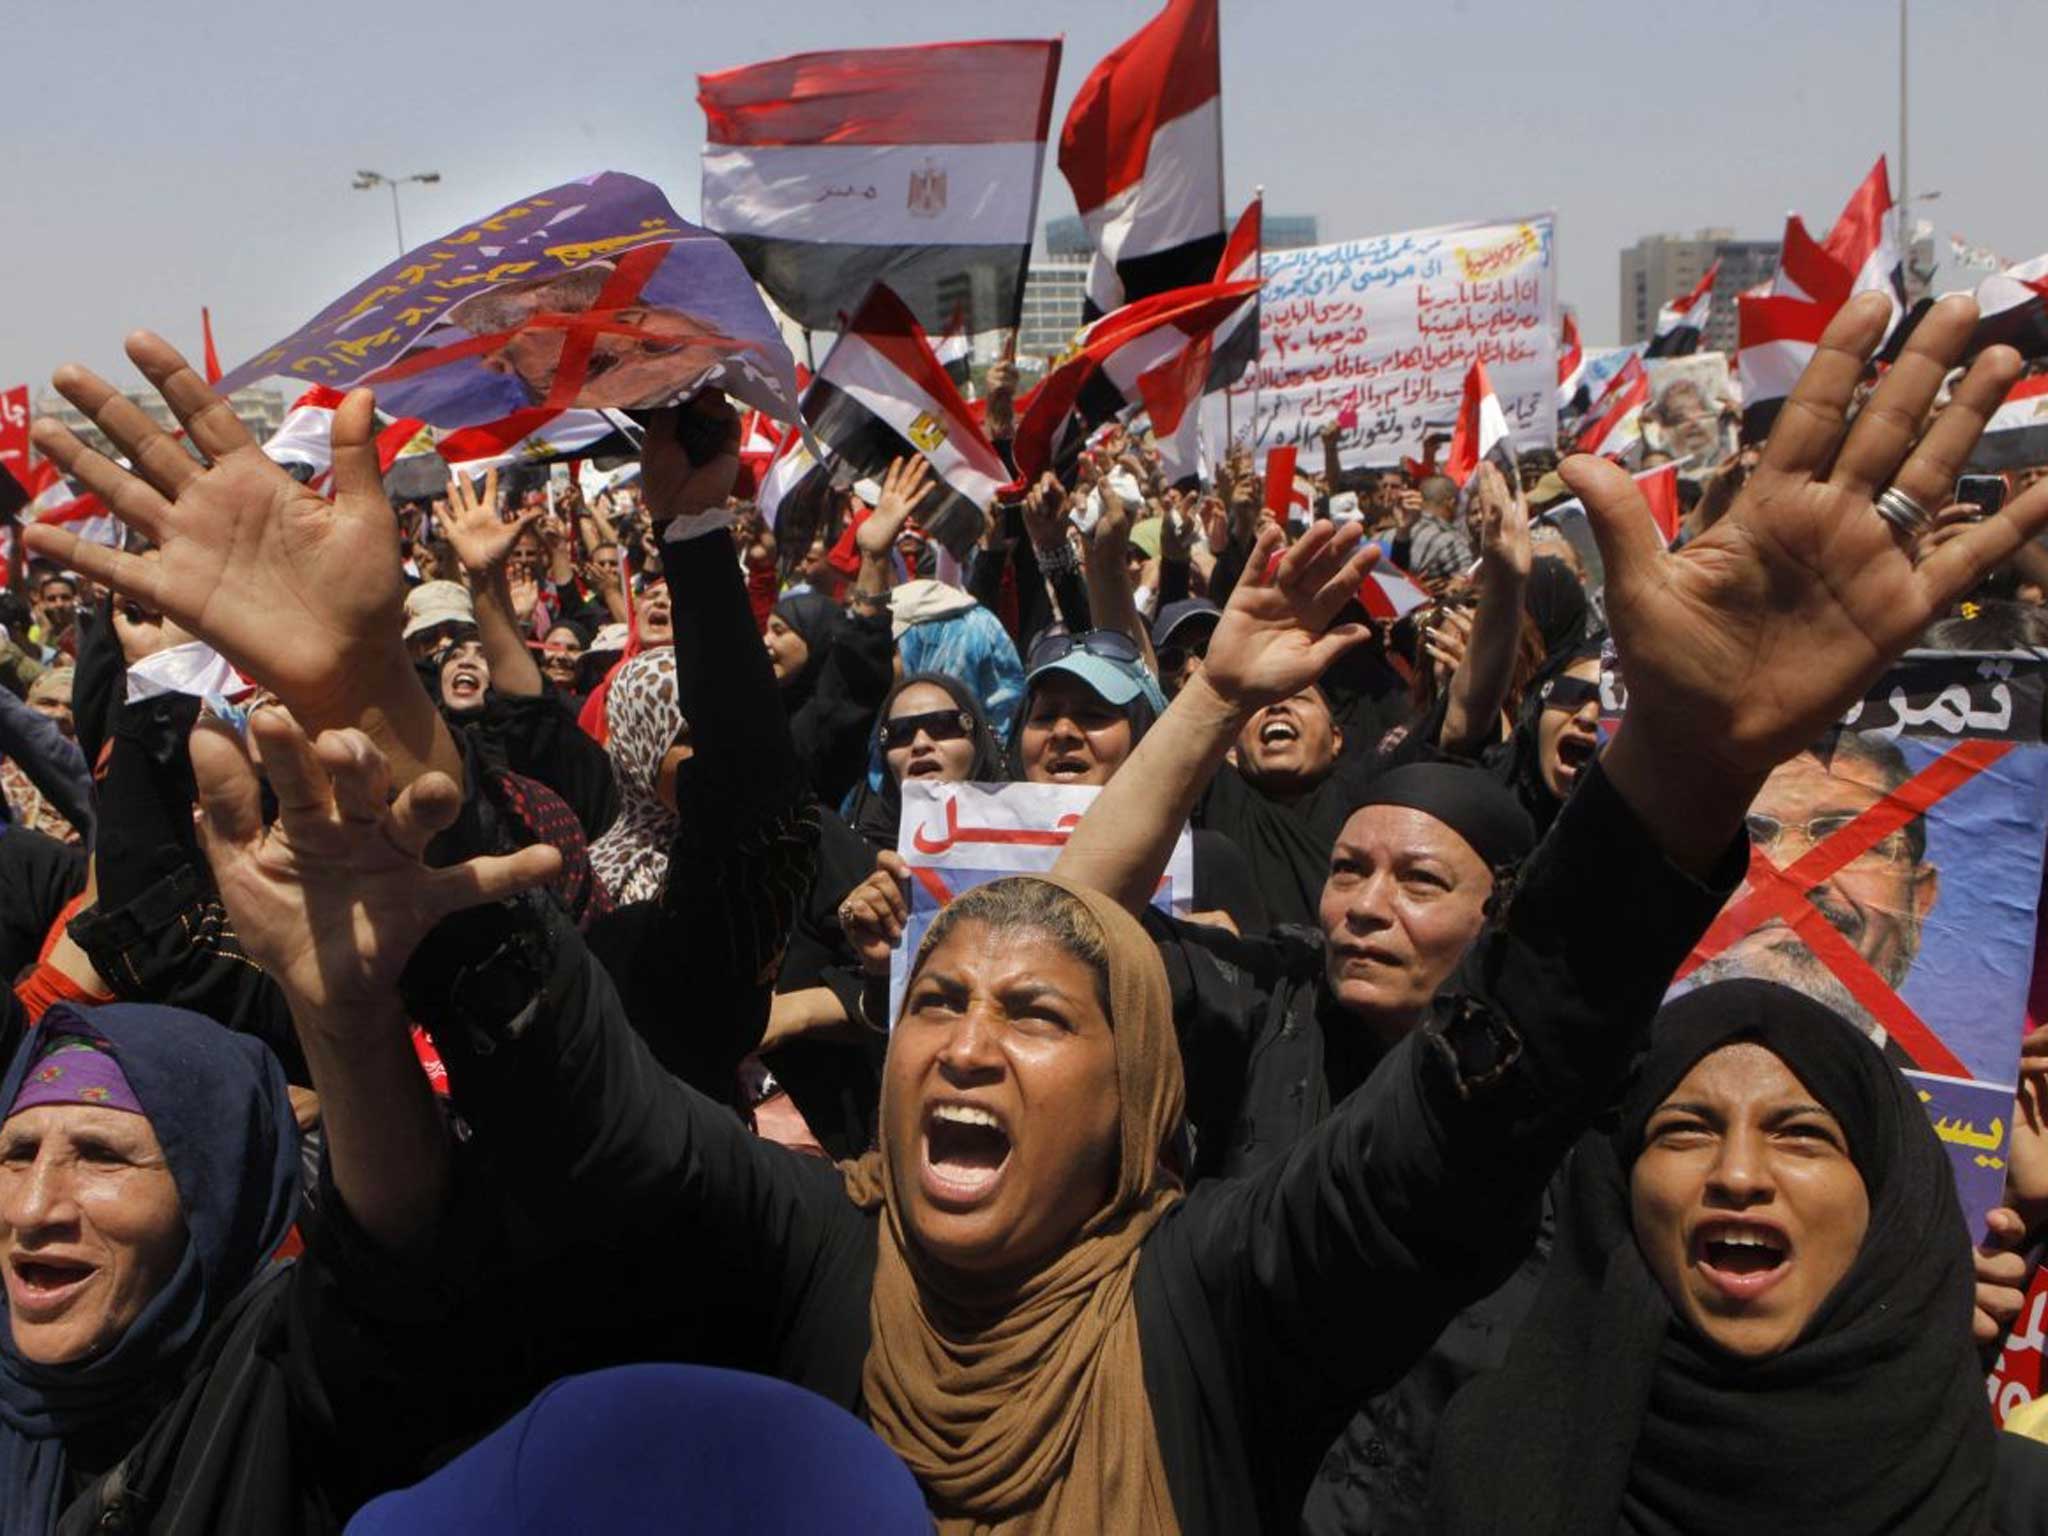 Egyptians protesting in June against President Mohamed Morsi, who was voted in the year before